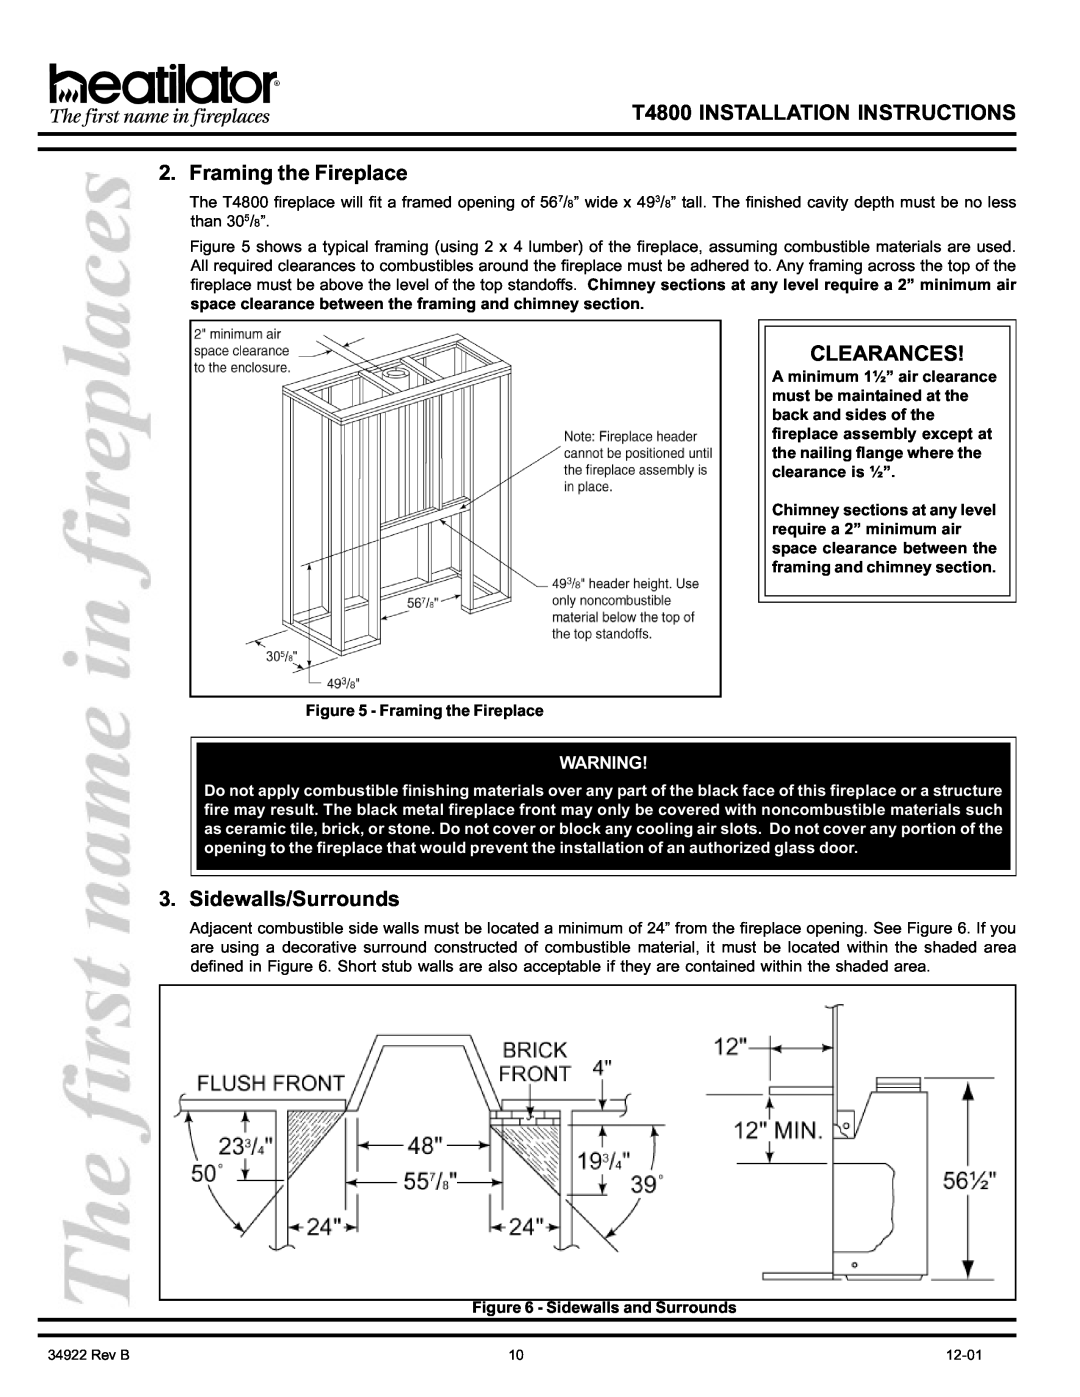 Heatiator manual Framing the Fireplace, Sidewalls/Surrounds, Sidewalls and Surrounds, T4800 INSTALLATION INSTRUCTIONS 